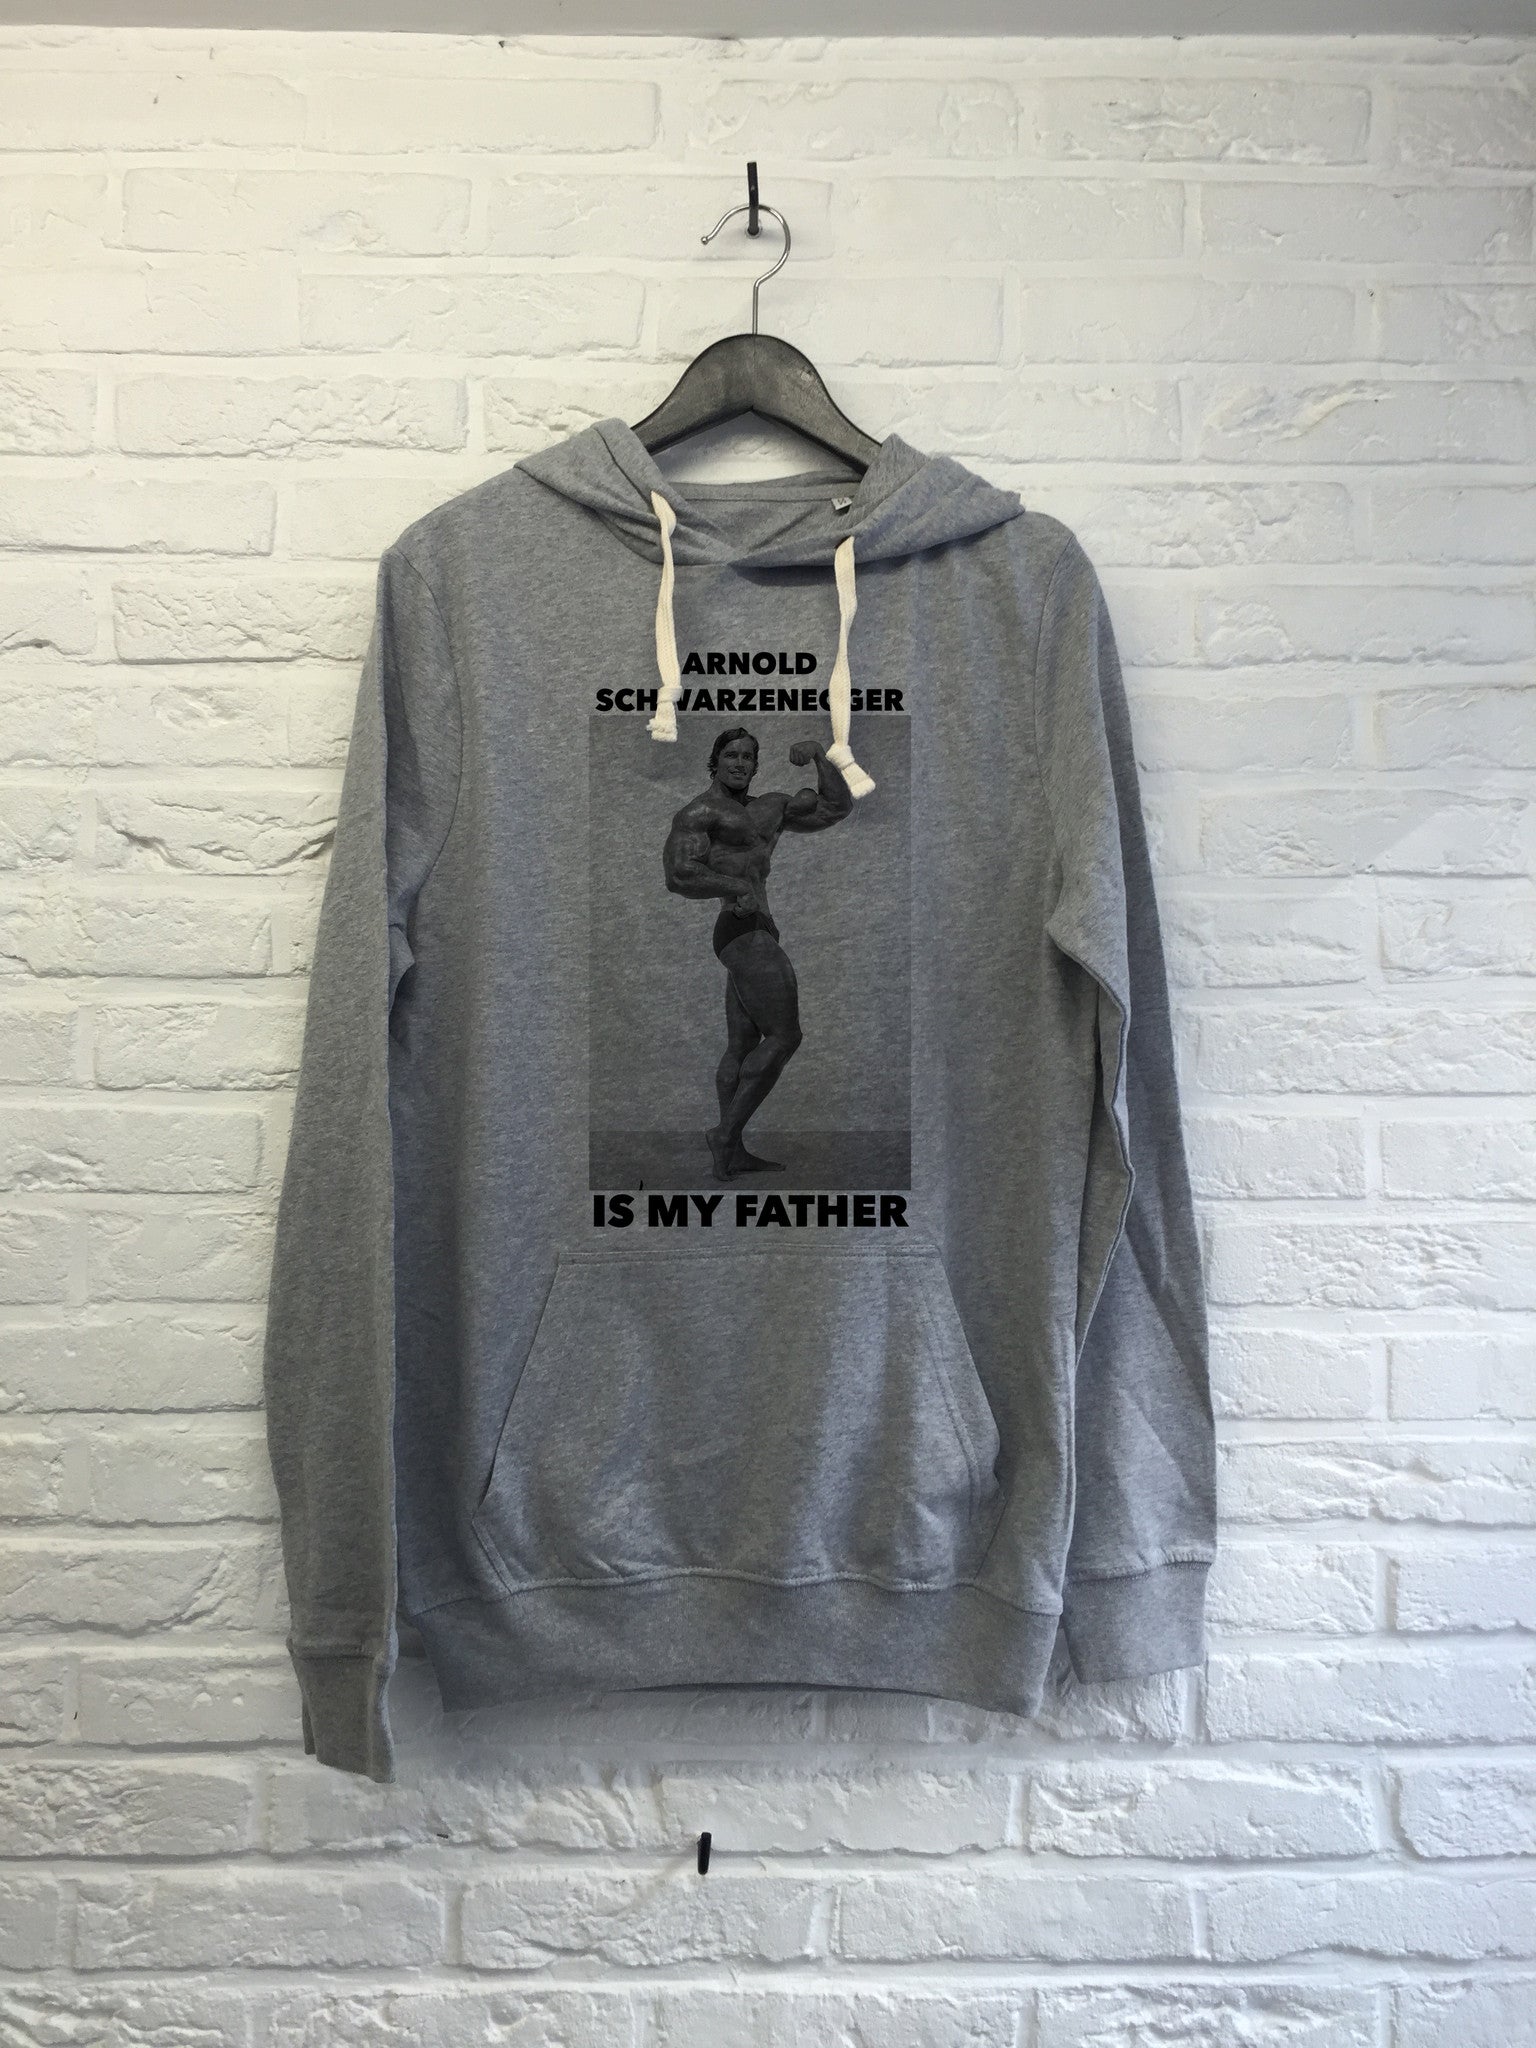 Arnold is my father - Hoodie super soft touch-Sweat shirts-Atelier Amelot